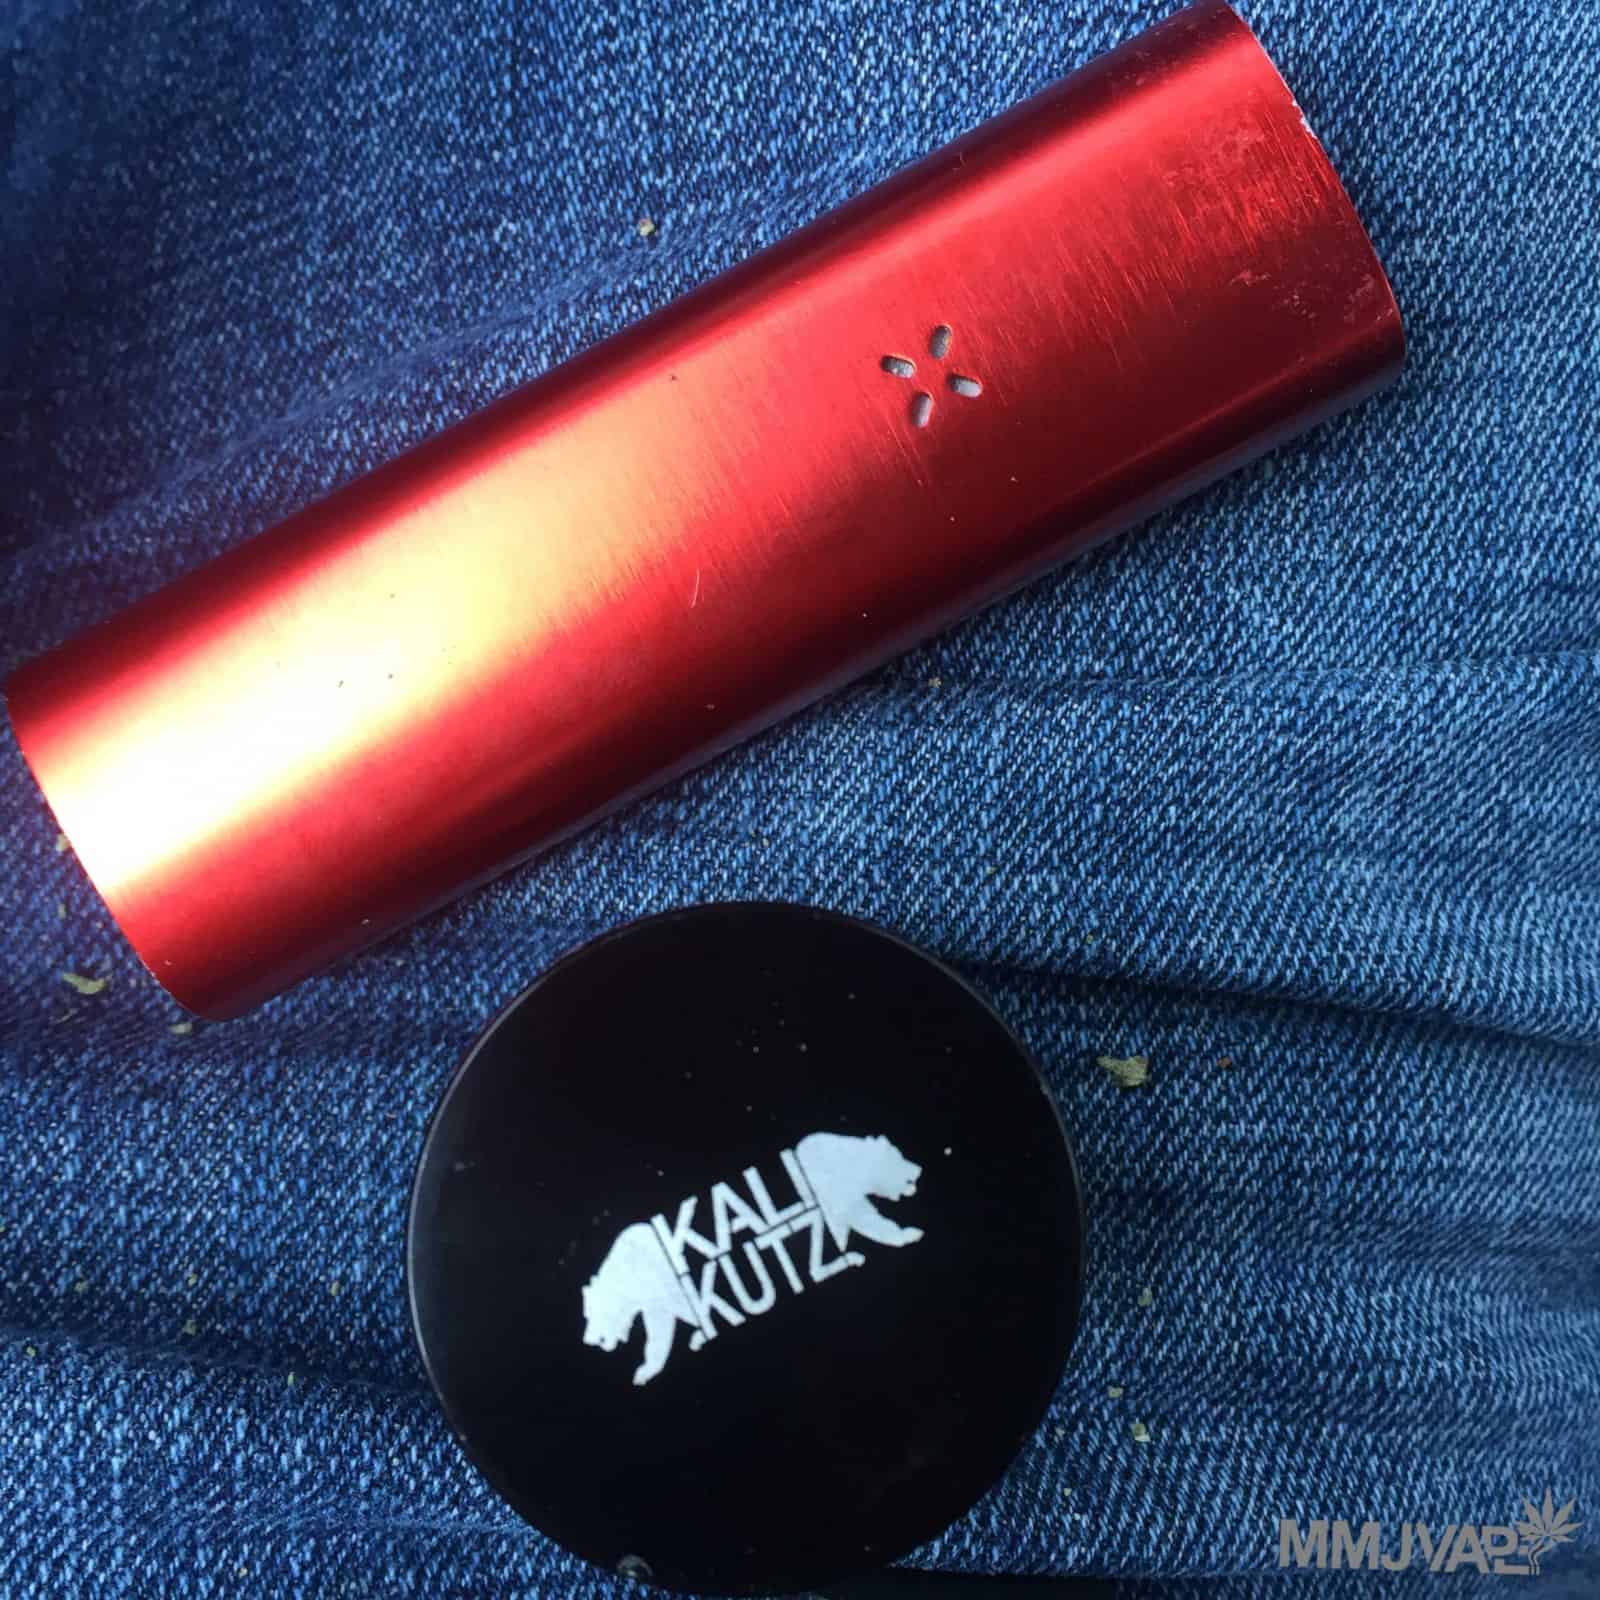 Fastest Way To Pack Your Pax 2 Vaporizer